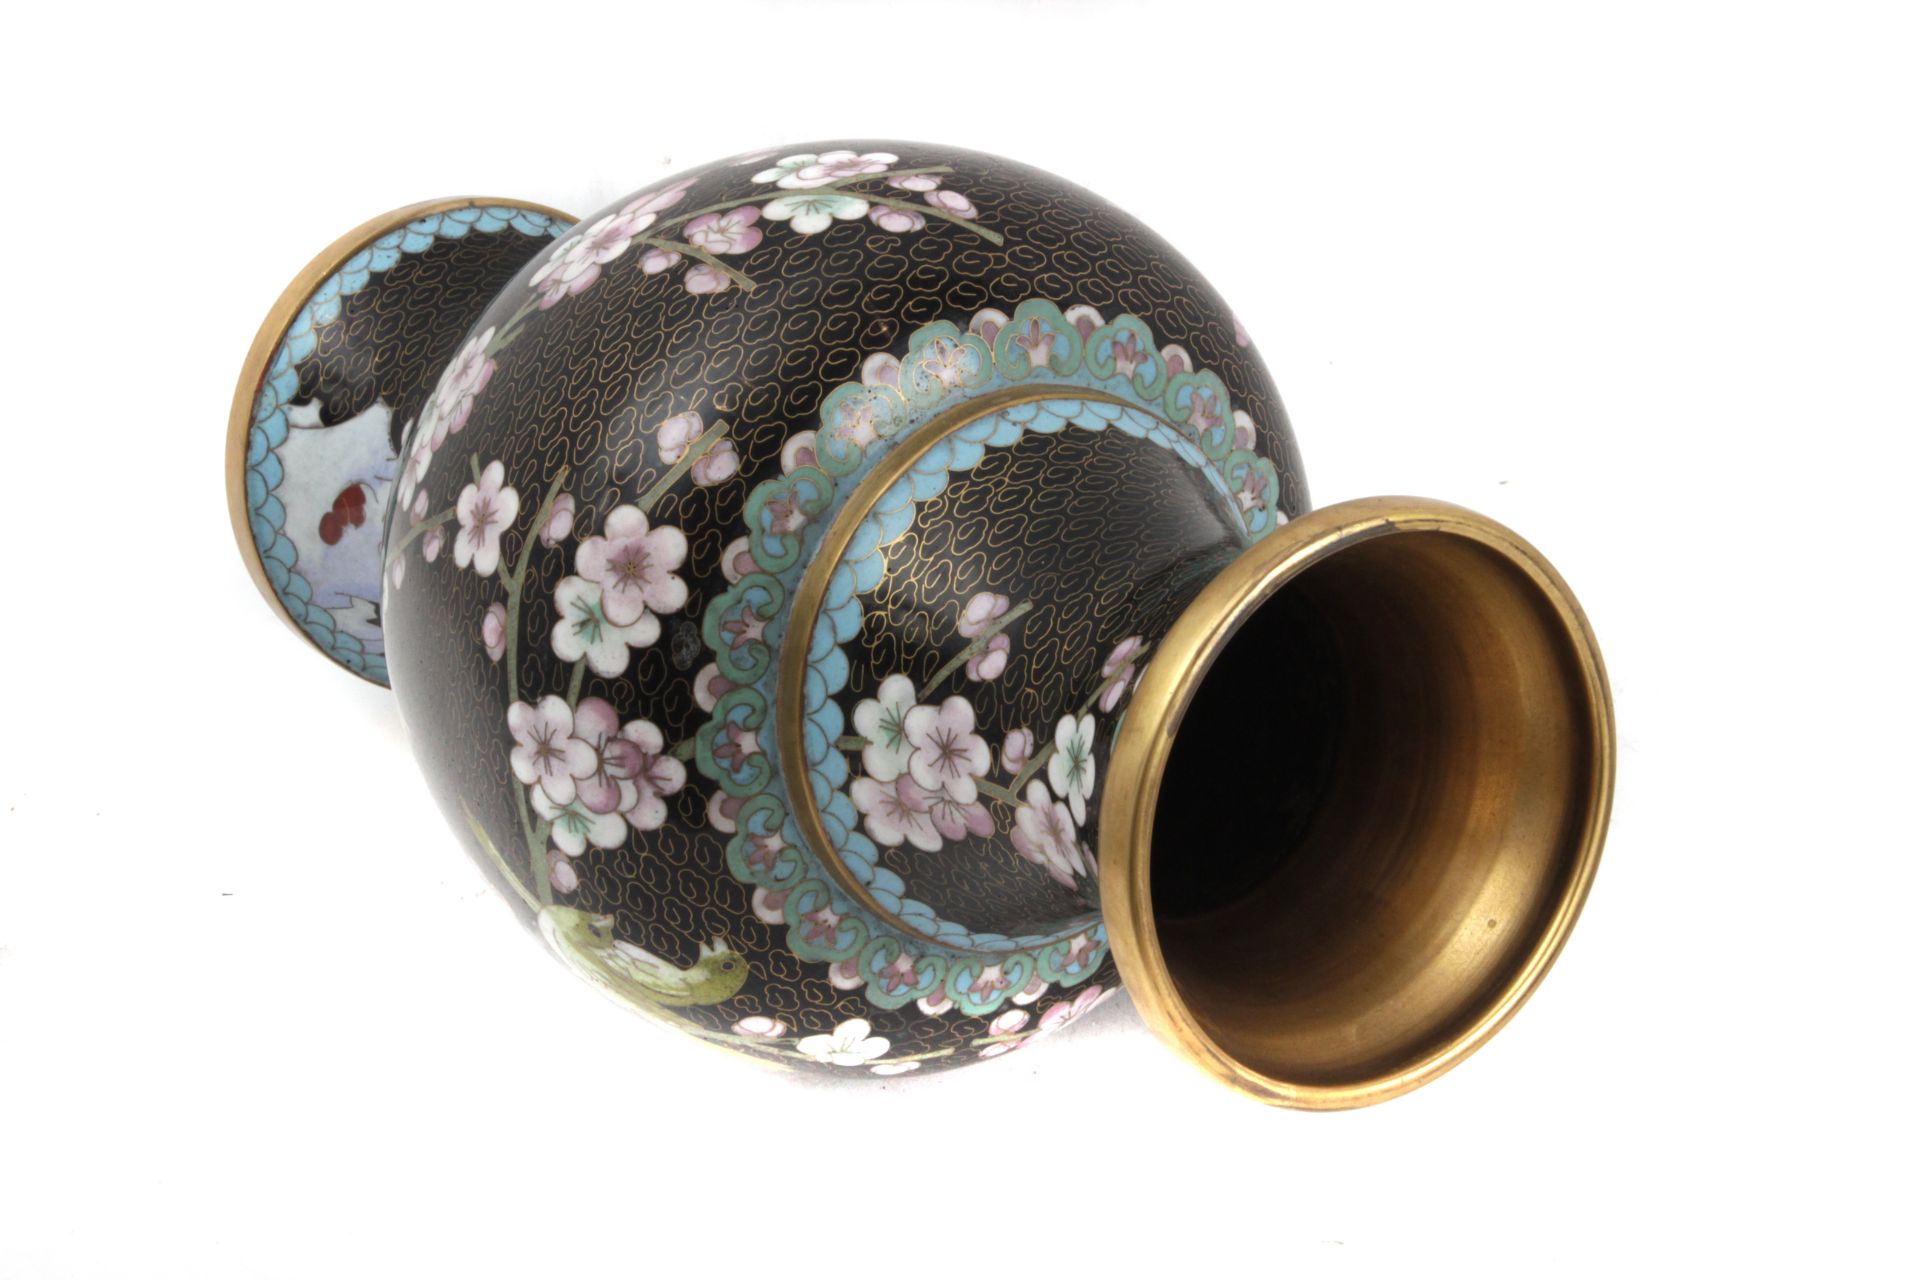 A 20th century Chinese vase in bronze and cloisonné enamel - Image 3 of 4